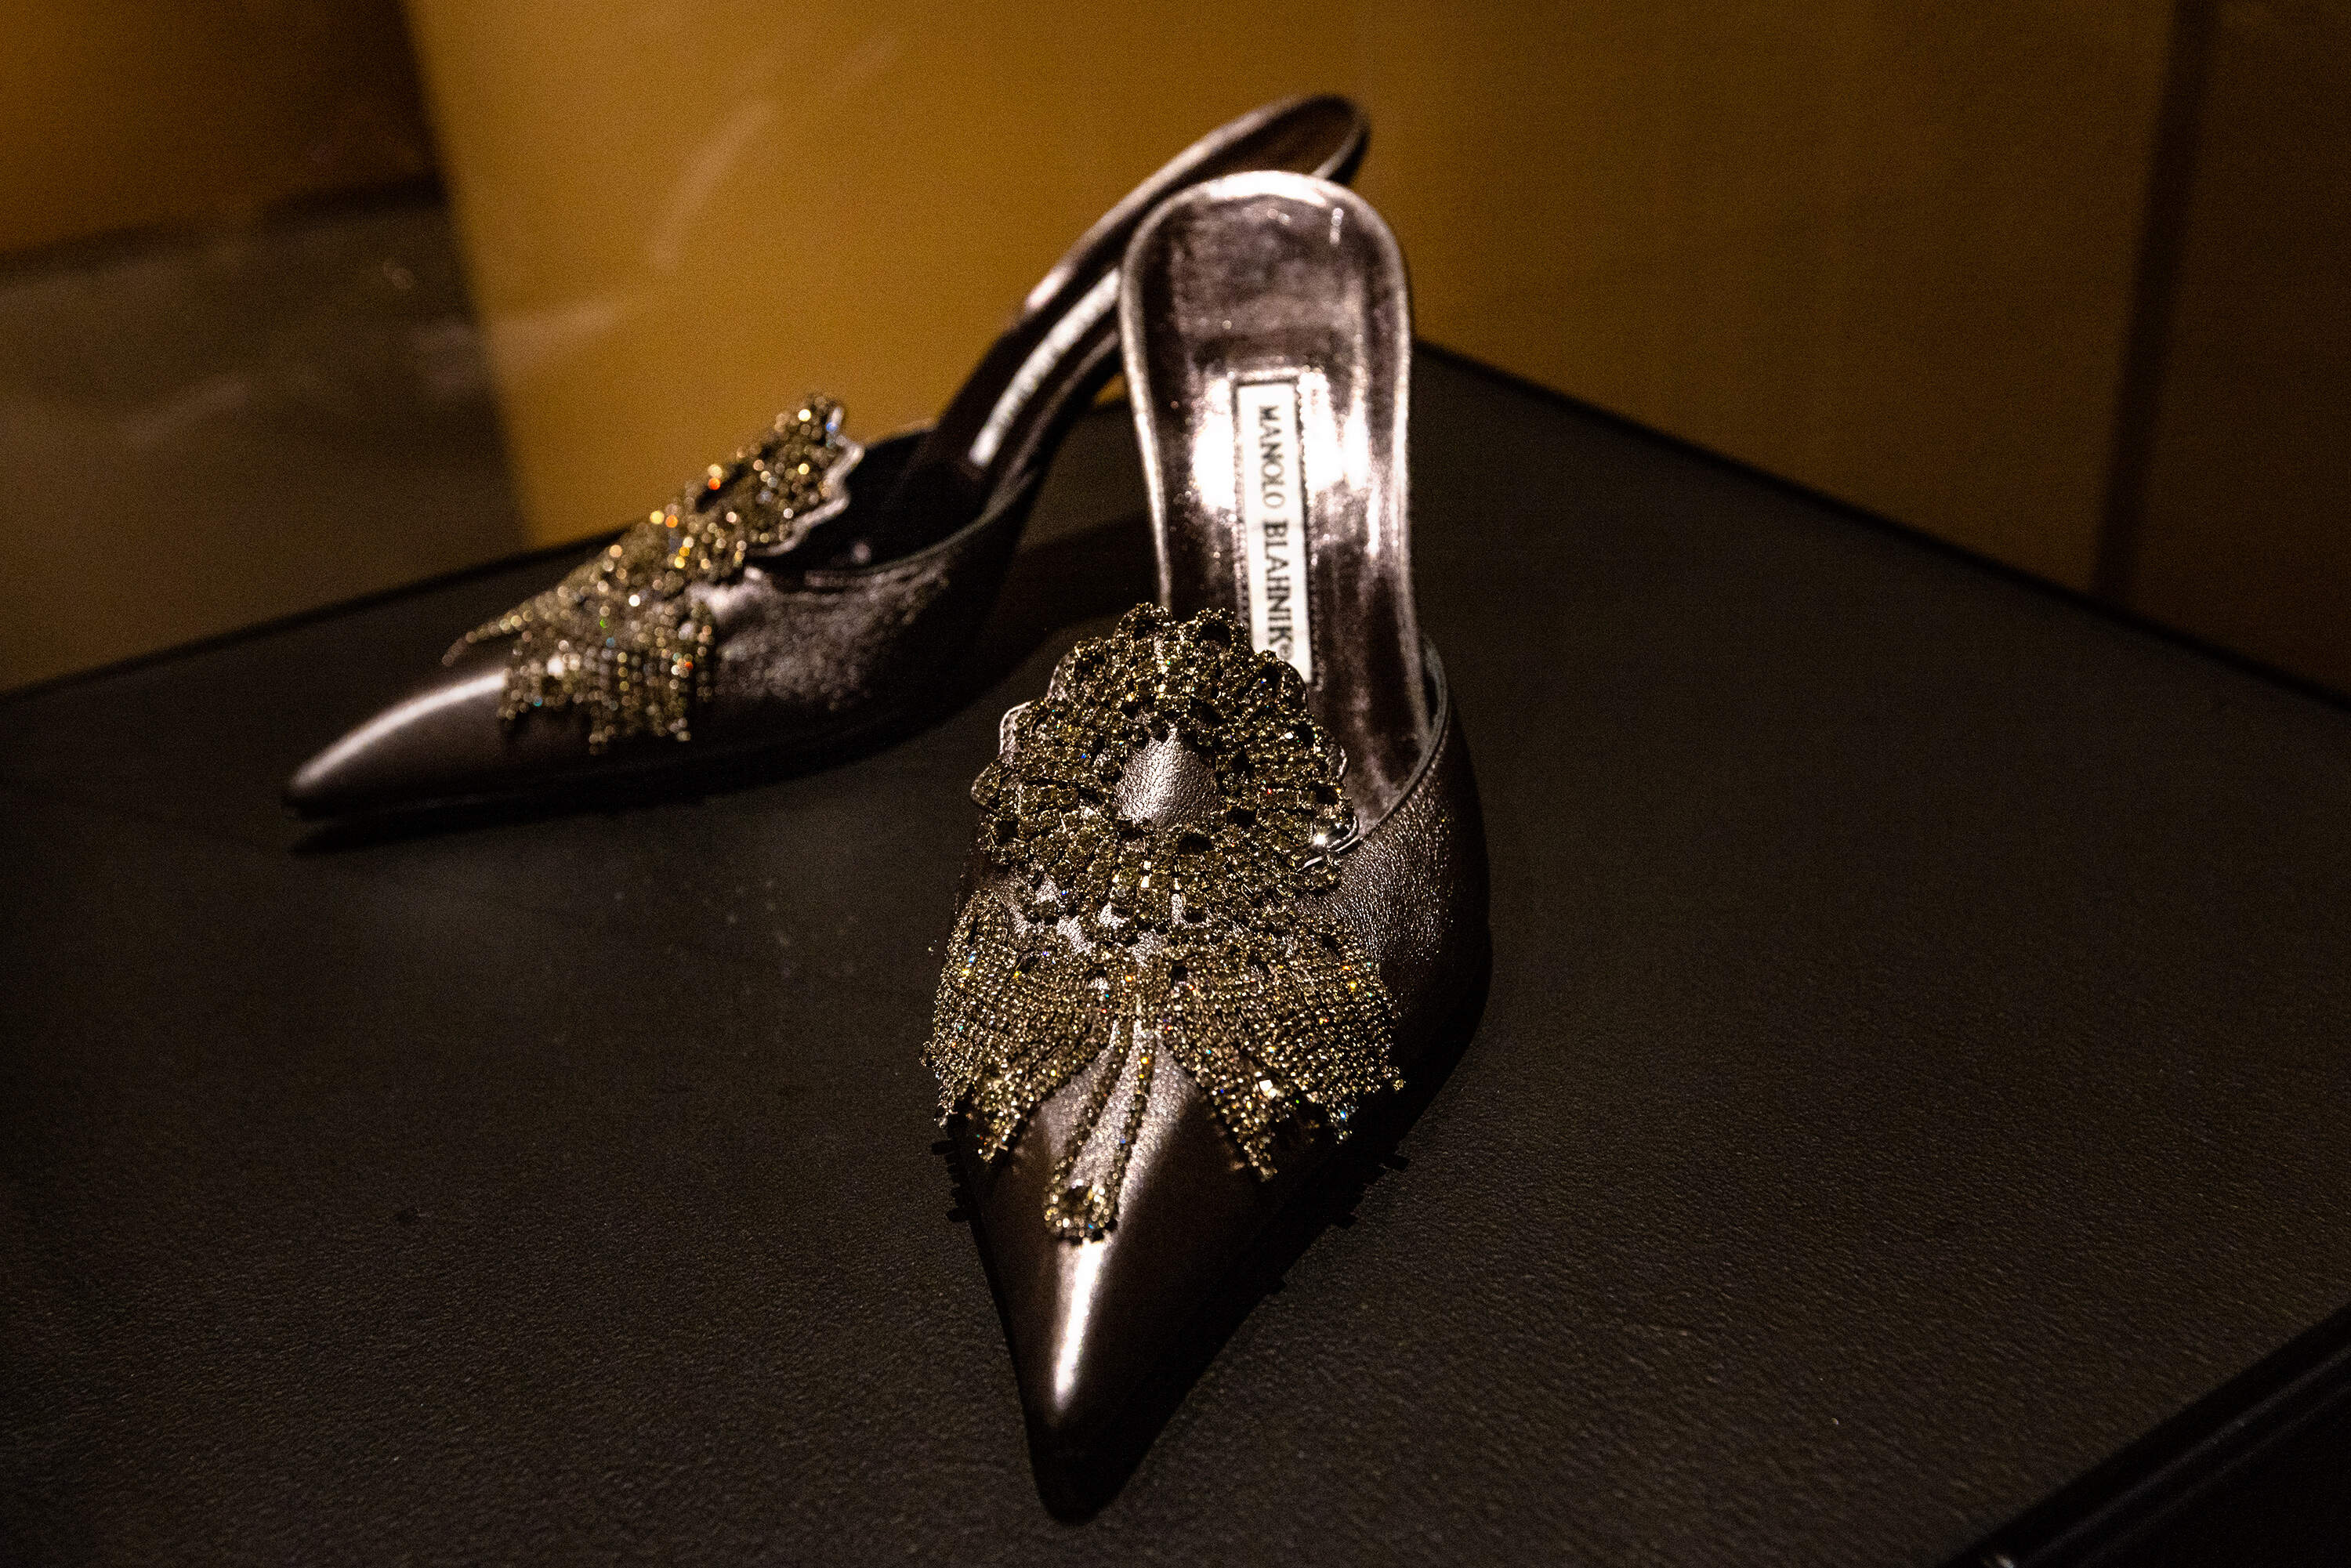 Leather shoes designed by Manolo Blahnik in 2006 worn by Donna Summer are part of the collection of works in the “Dress Up exhibit at the Museum of Fine Arts, Boston. (Jesse Costa/WBUR)